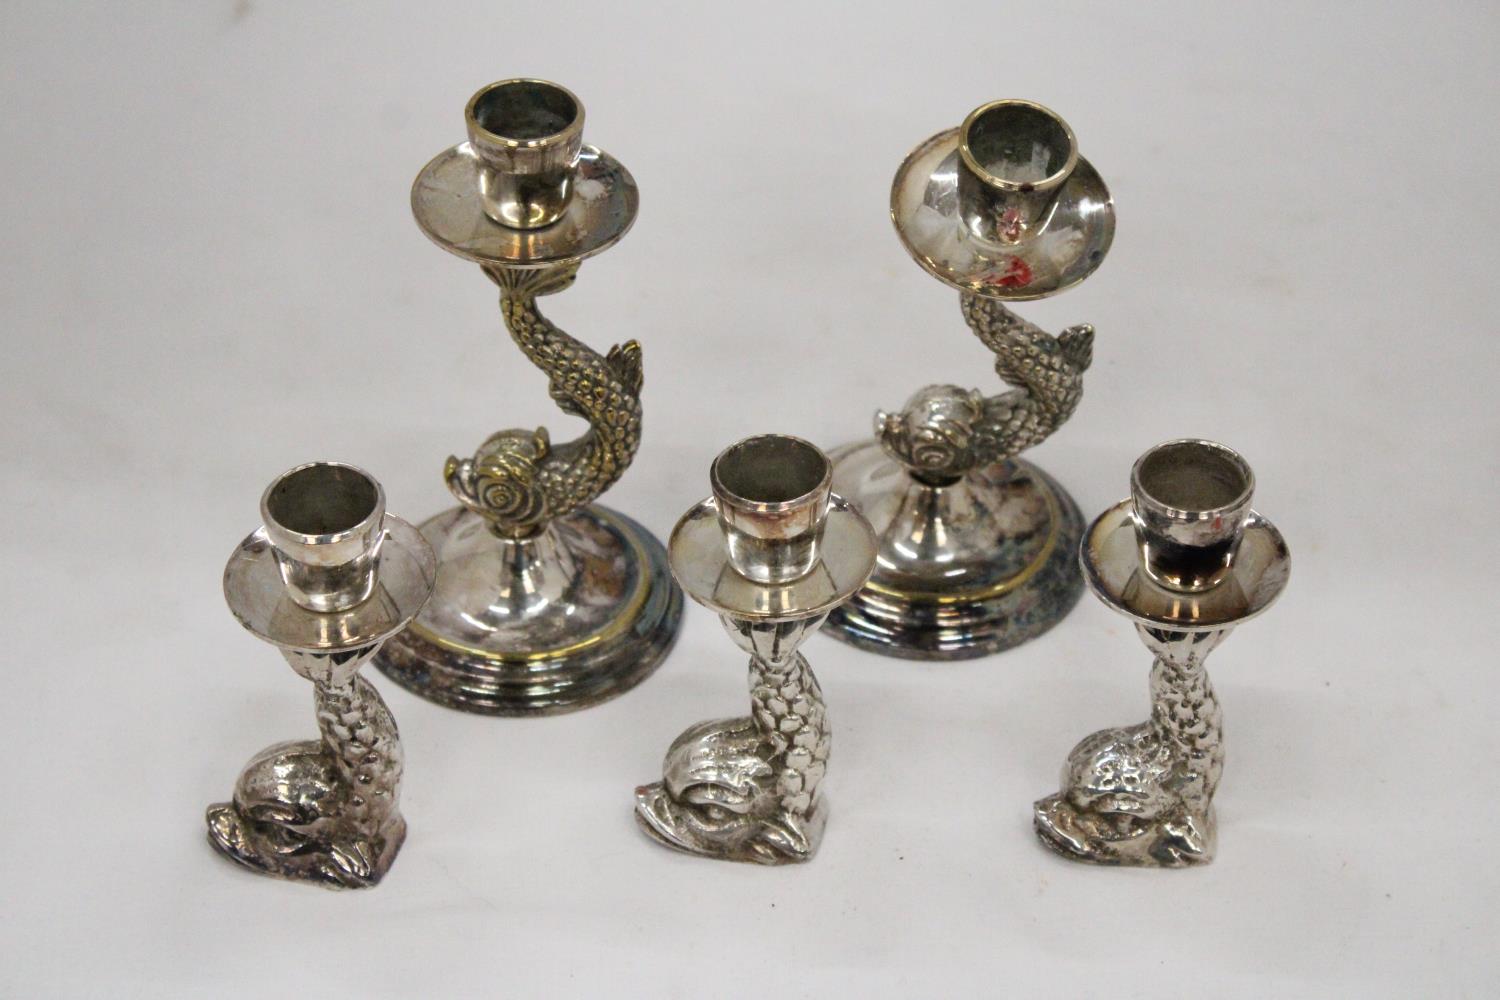 TWO VINTAGE ORNATE SILVER PLATED KOI CARP CANDLE HOLDERS PLUS THREE FURTHER KOI FISH CANDLE STICKS - Image 7 of 7